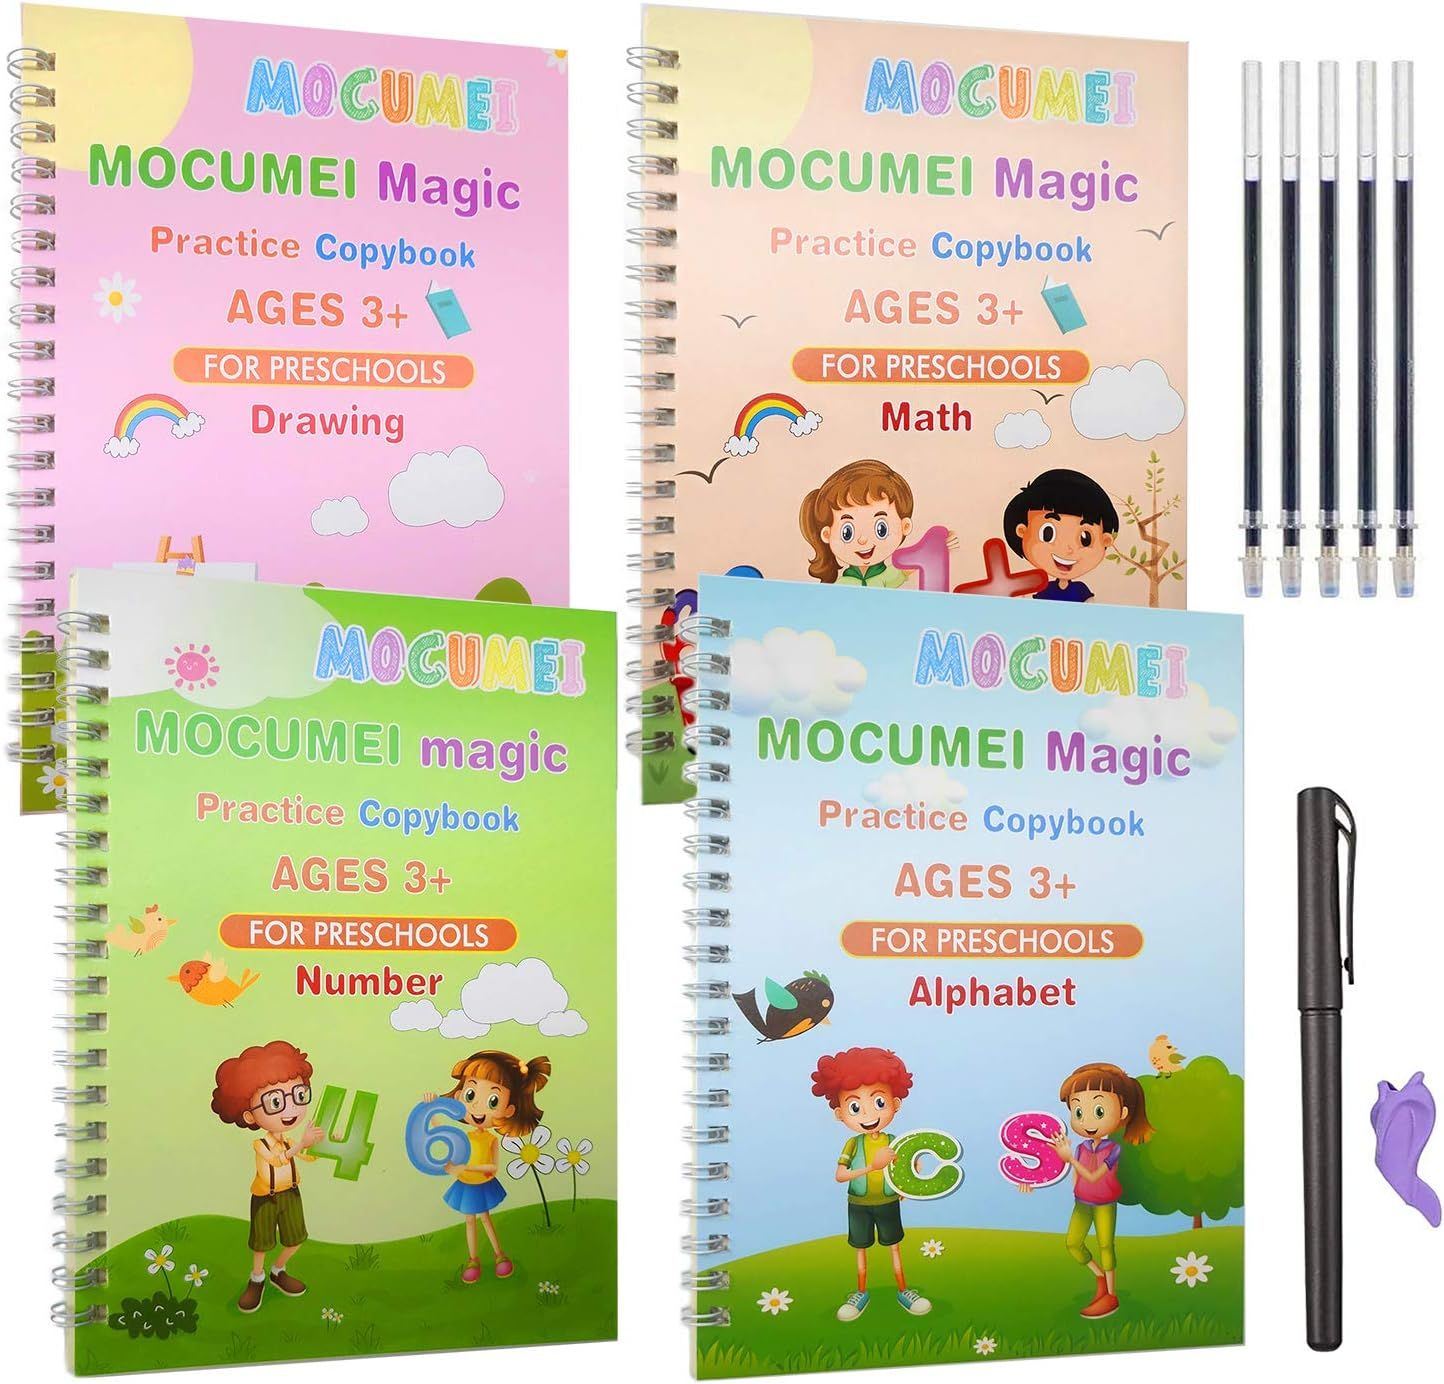  Groove Calligraphy Magic Copybook Learn To Write For Kids  Age 2 3 4 5 6 Handwriting Practice Preschool Activities ABC Alphabet Number  Tracing Groovd Book Kindergarten Supplies School Must Haves